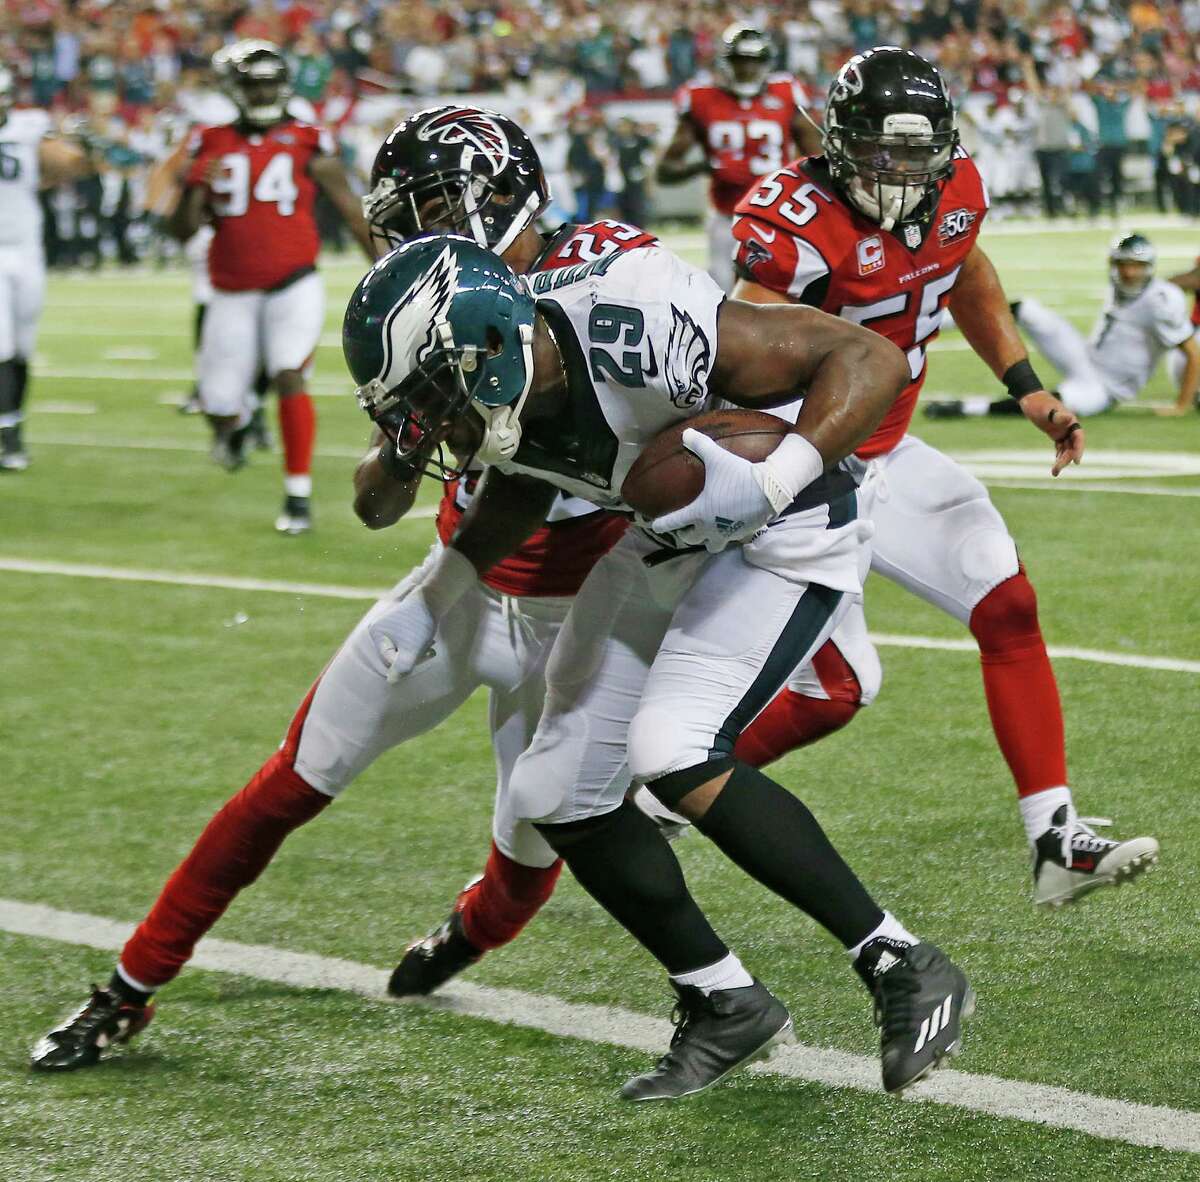 Atlanta Falcons cornerback Robert Alford (23) hits Philadelphia Eagles running back DeMarco Murray (29) after murray scores a touchdown during the second half of an NFL football game, Monday, Sept. 14, 2015, in Atlanta. (AP Photo/John Bazemore)